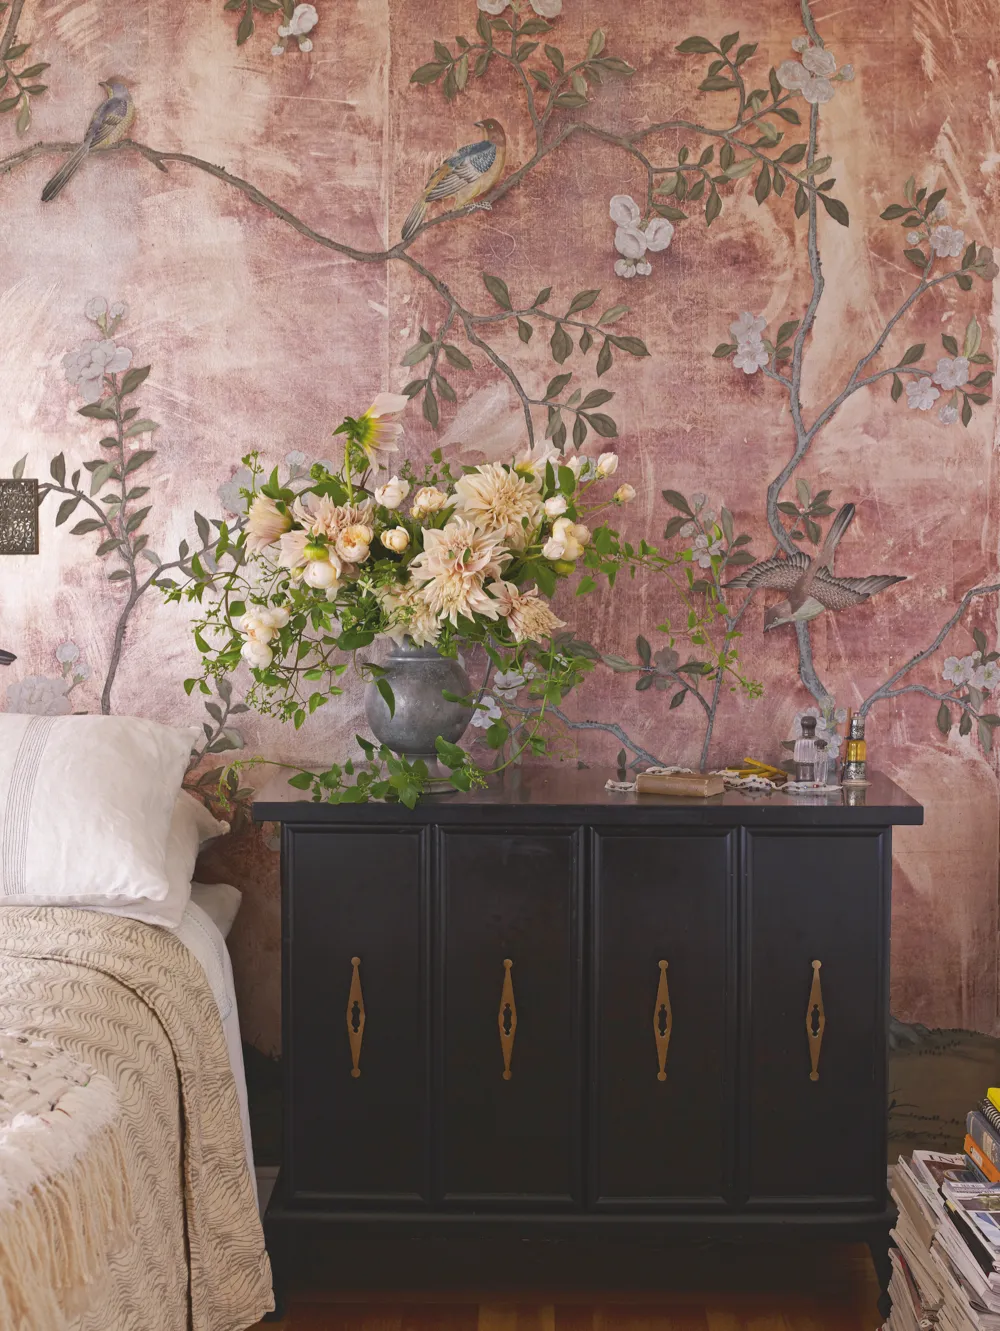 Hand-painted chinoiserie wallpaper by de Gournay